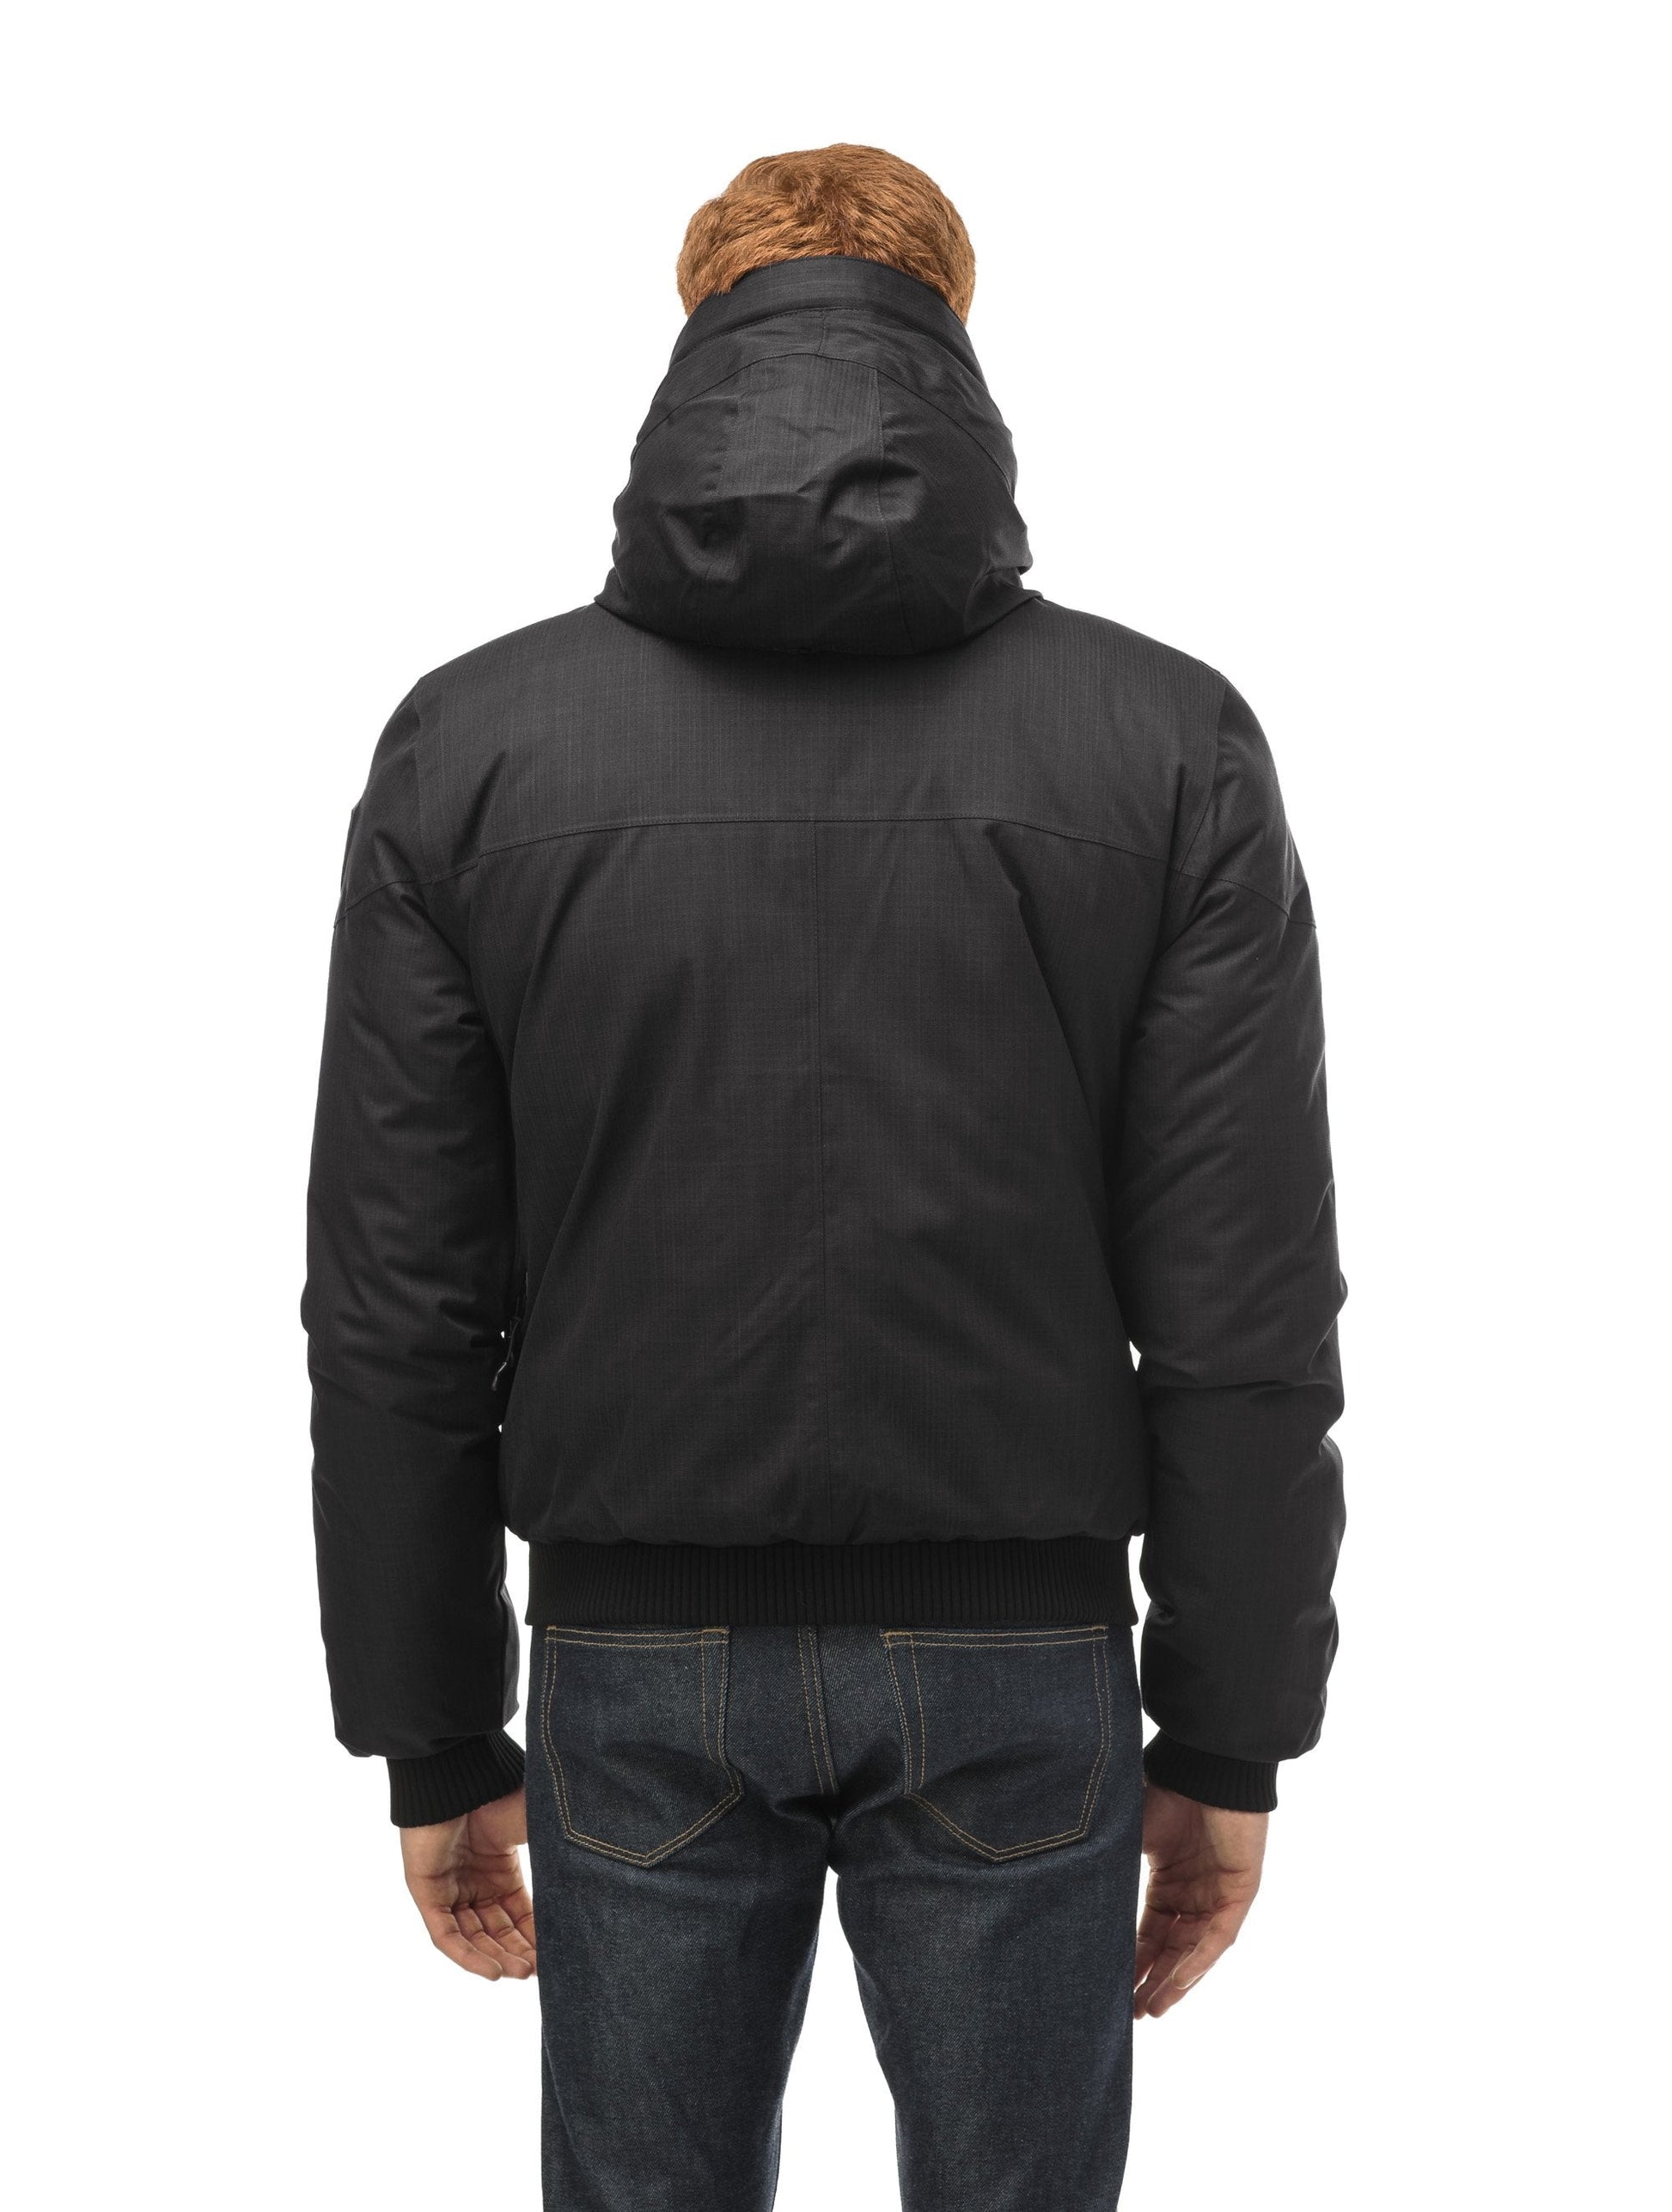 Men's classic down bomber with two patch pockets and a right shoulder storm flap in CH Black